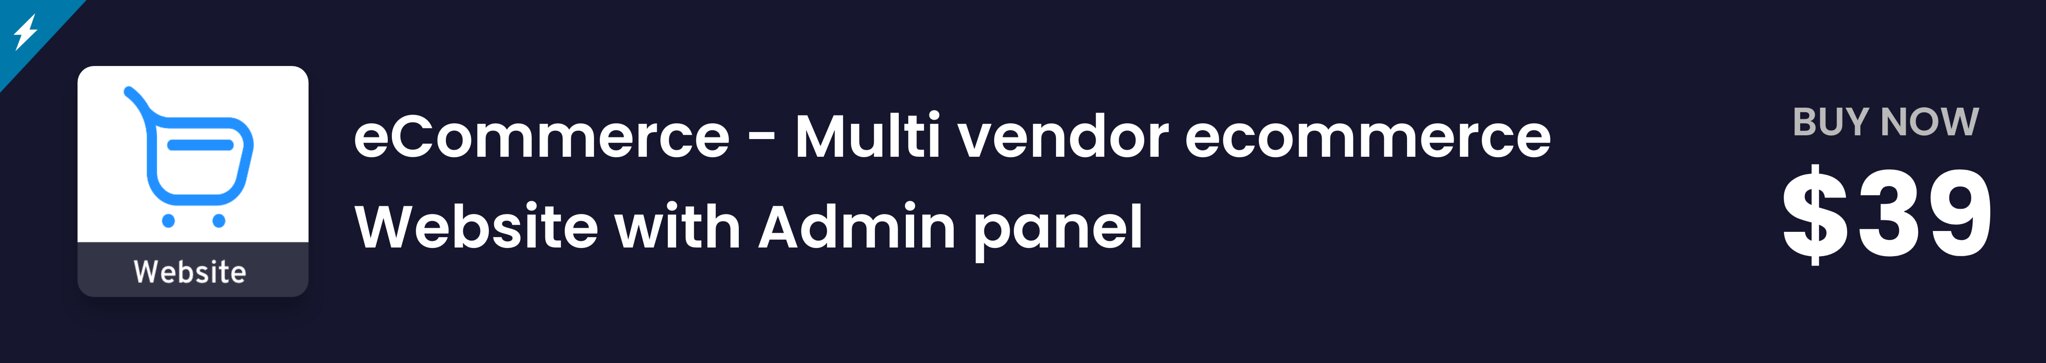 eCommerce - Multi vendor ecommerce Android App with Admin panel - 1